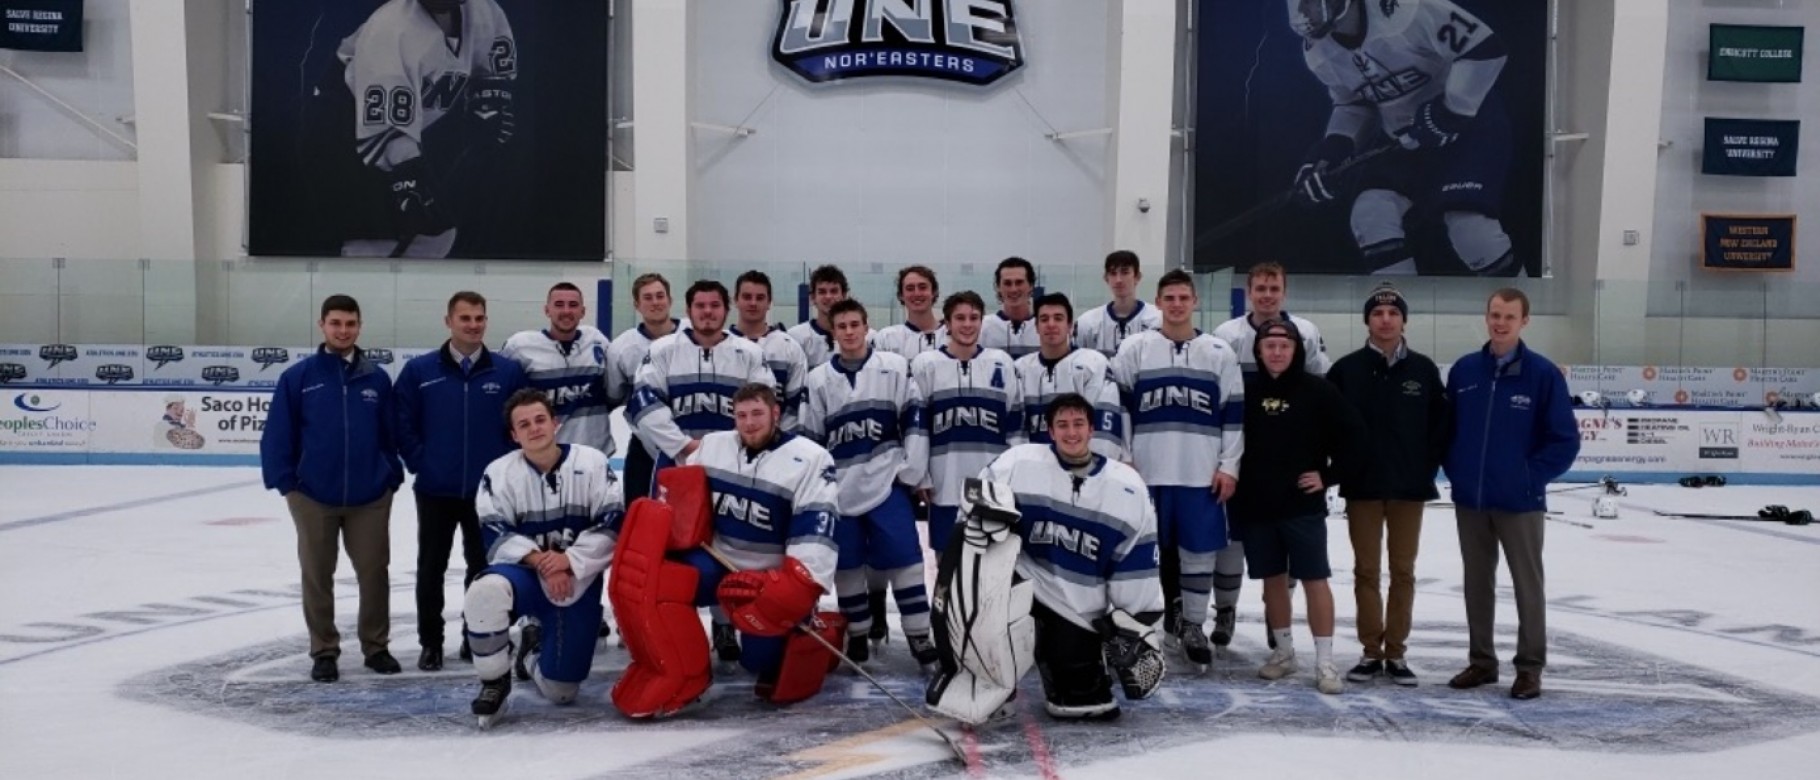 Members of the men's club hockey team raised money to donate to health care workers